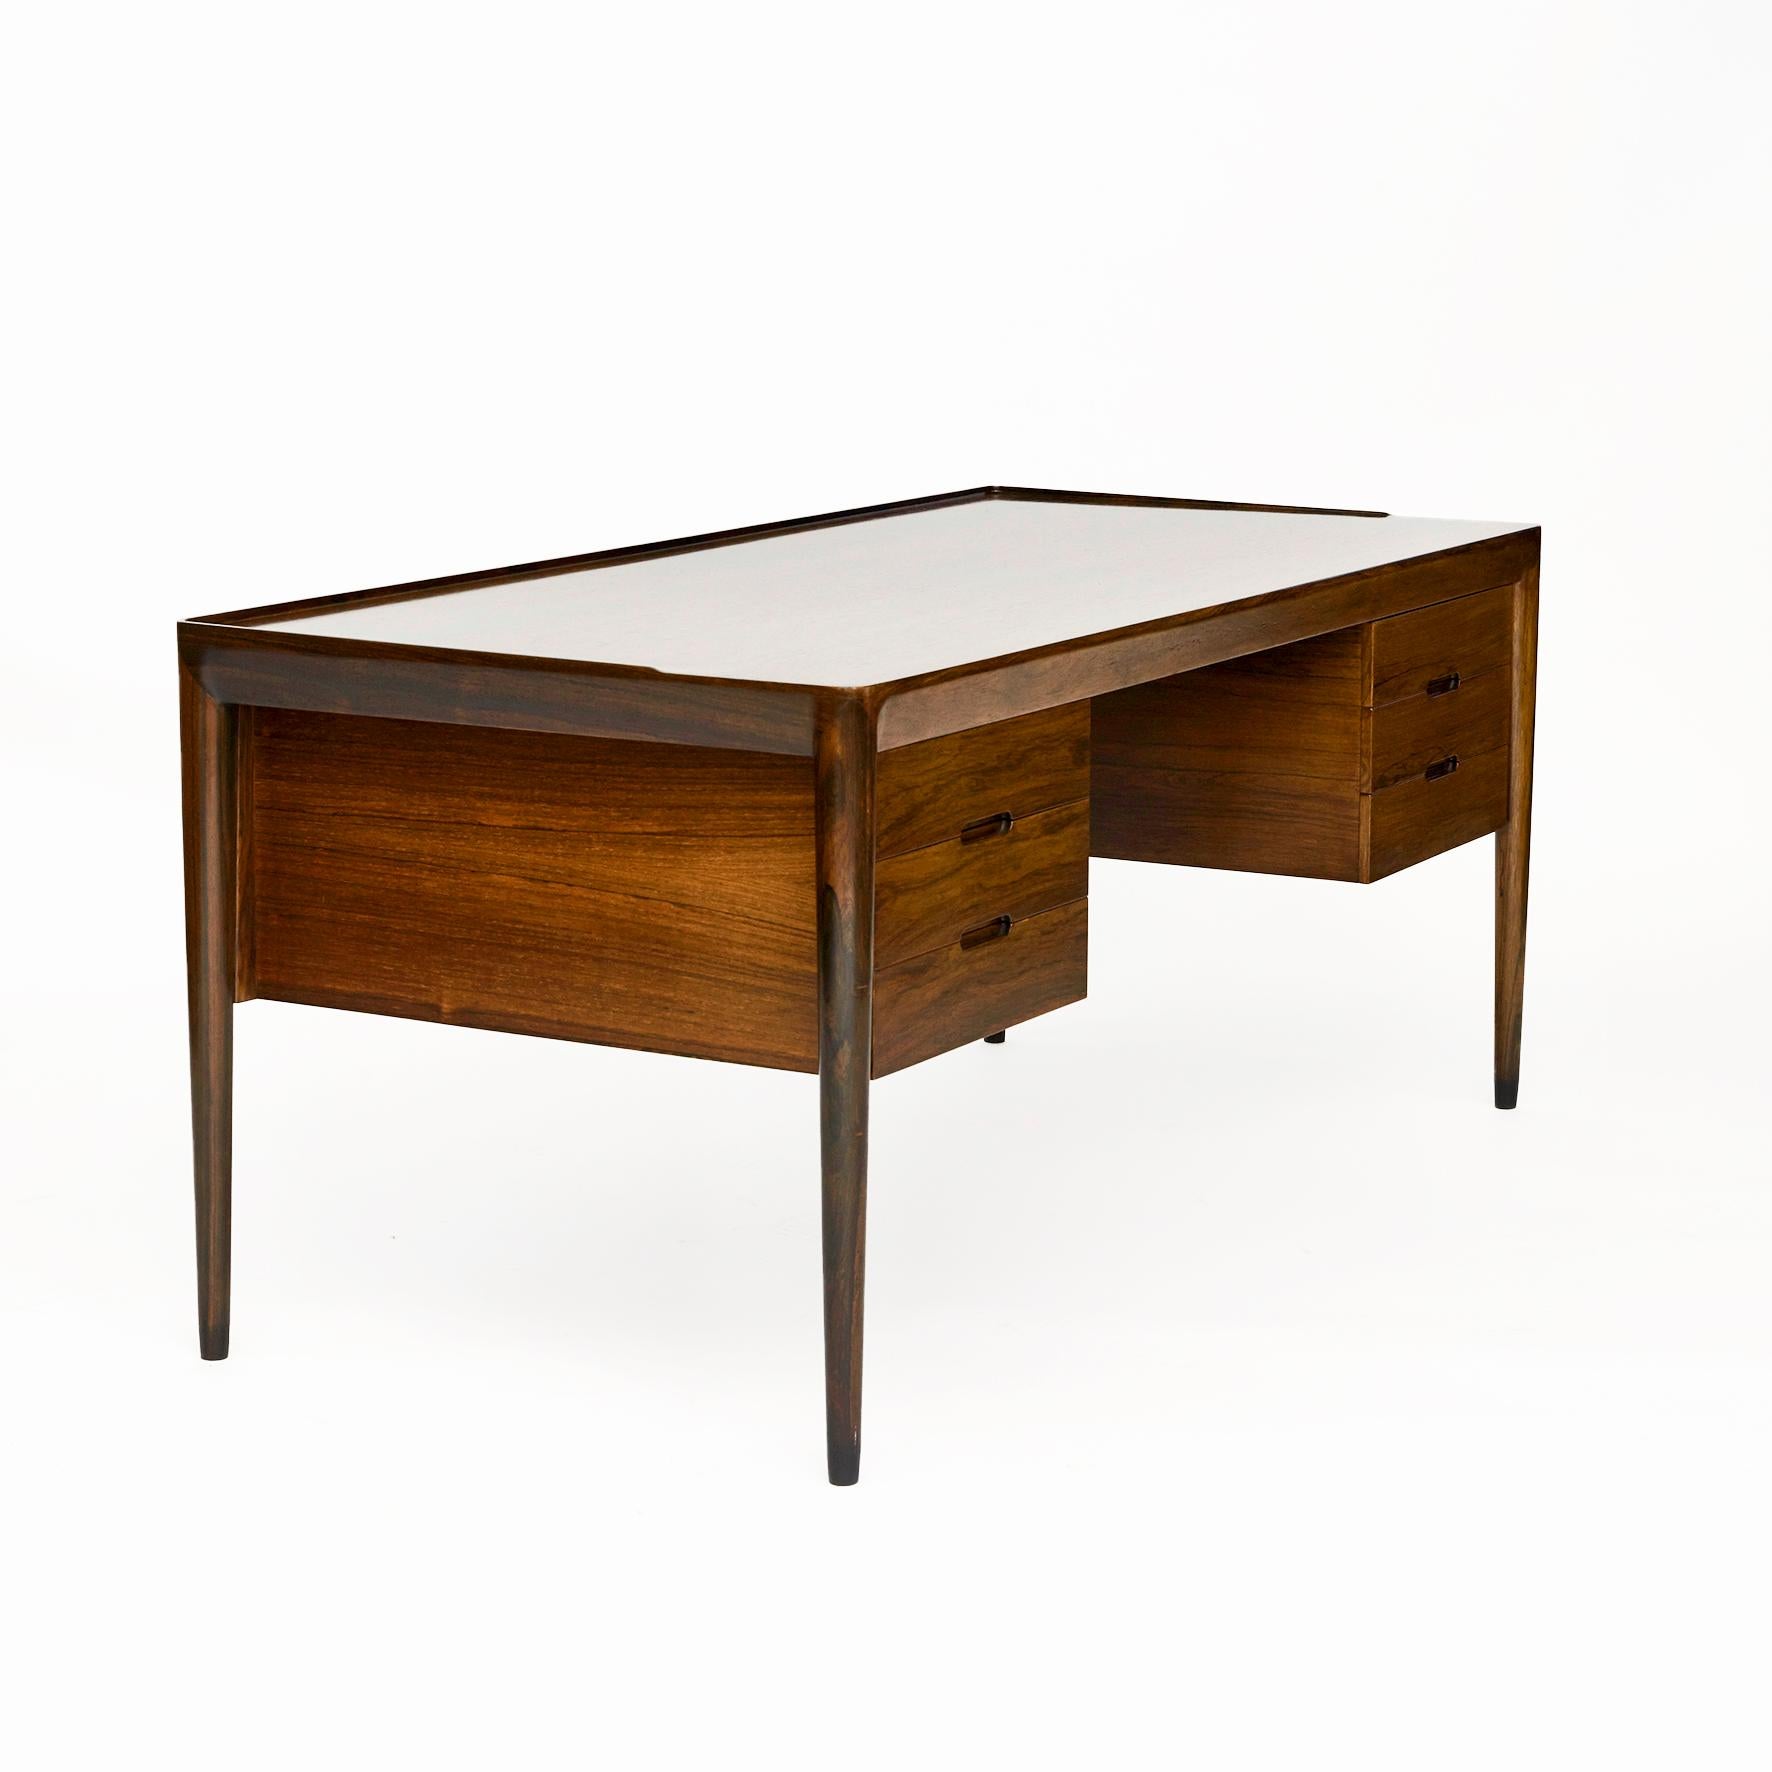 Erik Riisager Hansen.
Freestanding desk in Rio rosewood. Top with raised edge on tapered legs. Three drawers at front with recessed pulls
The desk shows remarkable high-quality craftsmanship and is equipped with many beautiful details.
Executed by